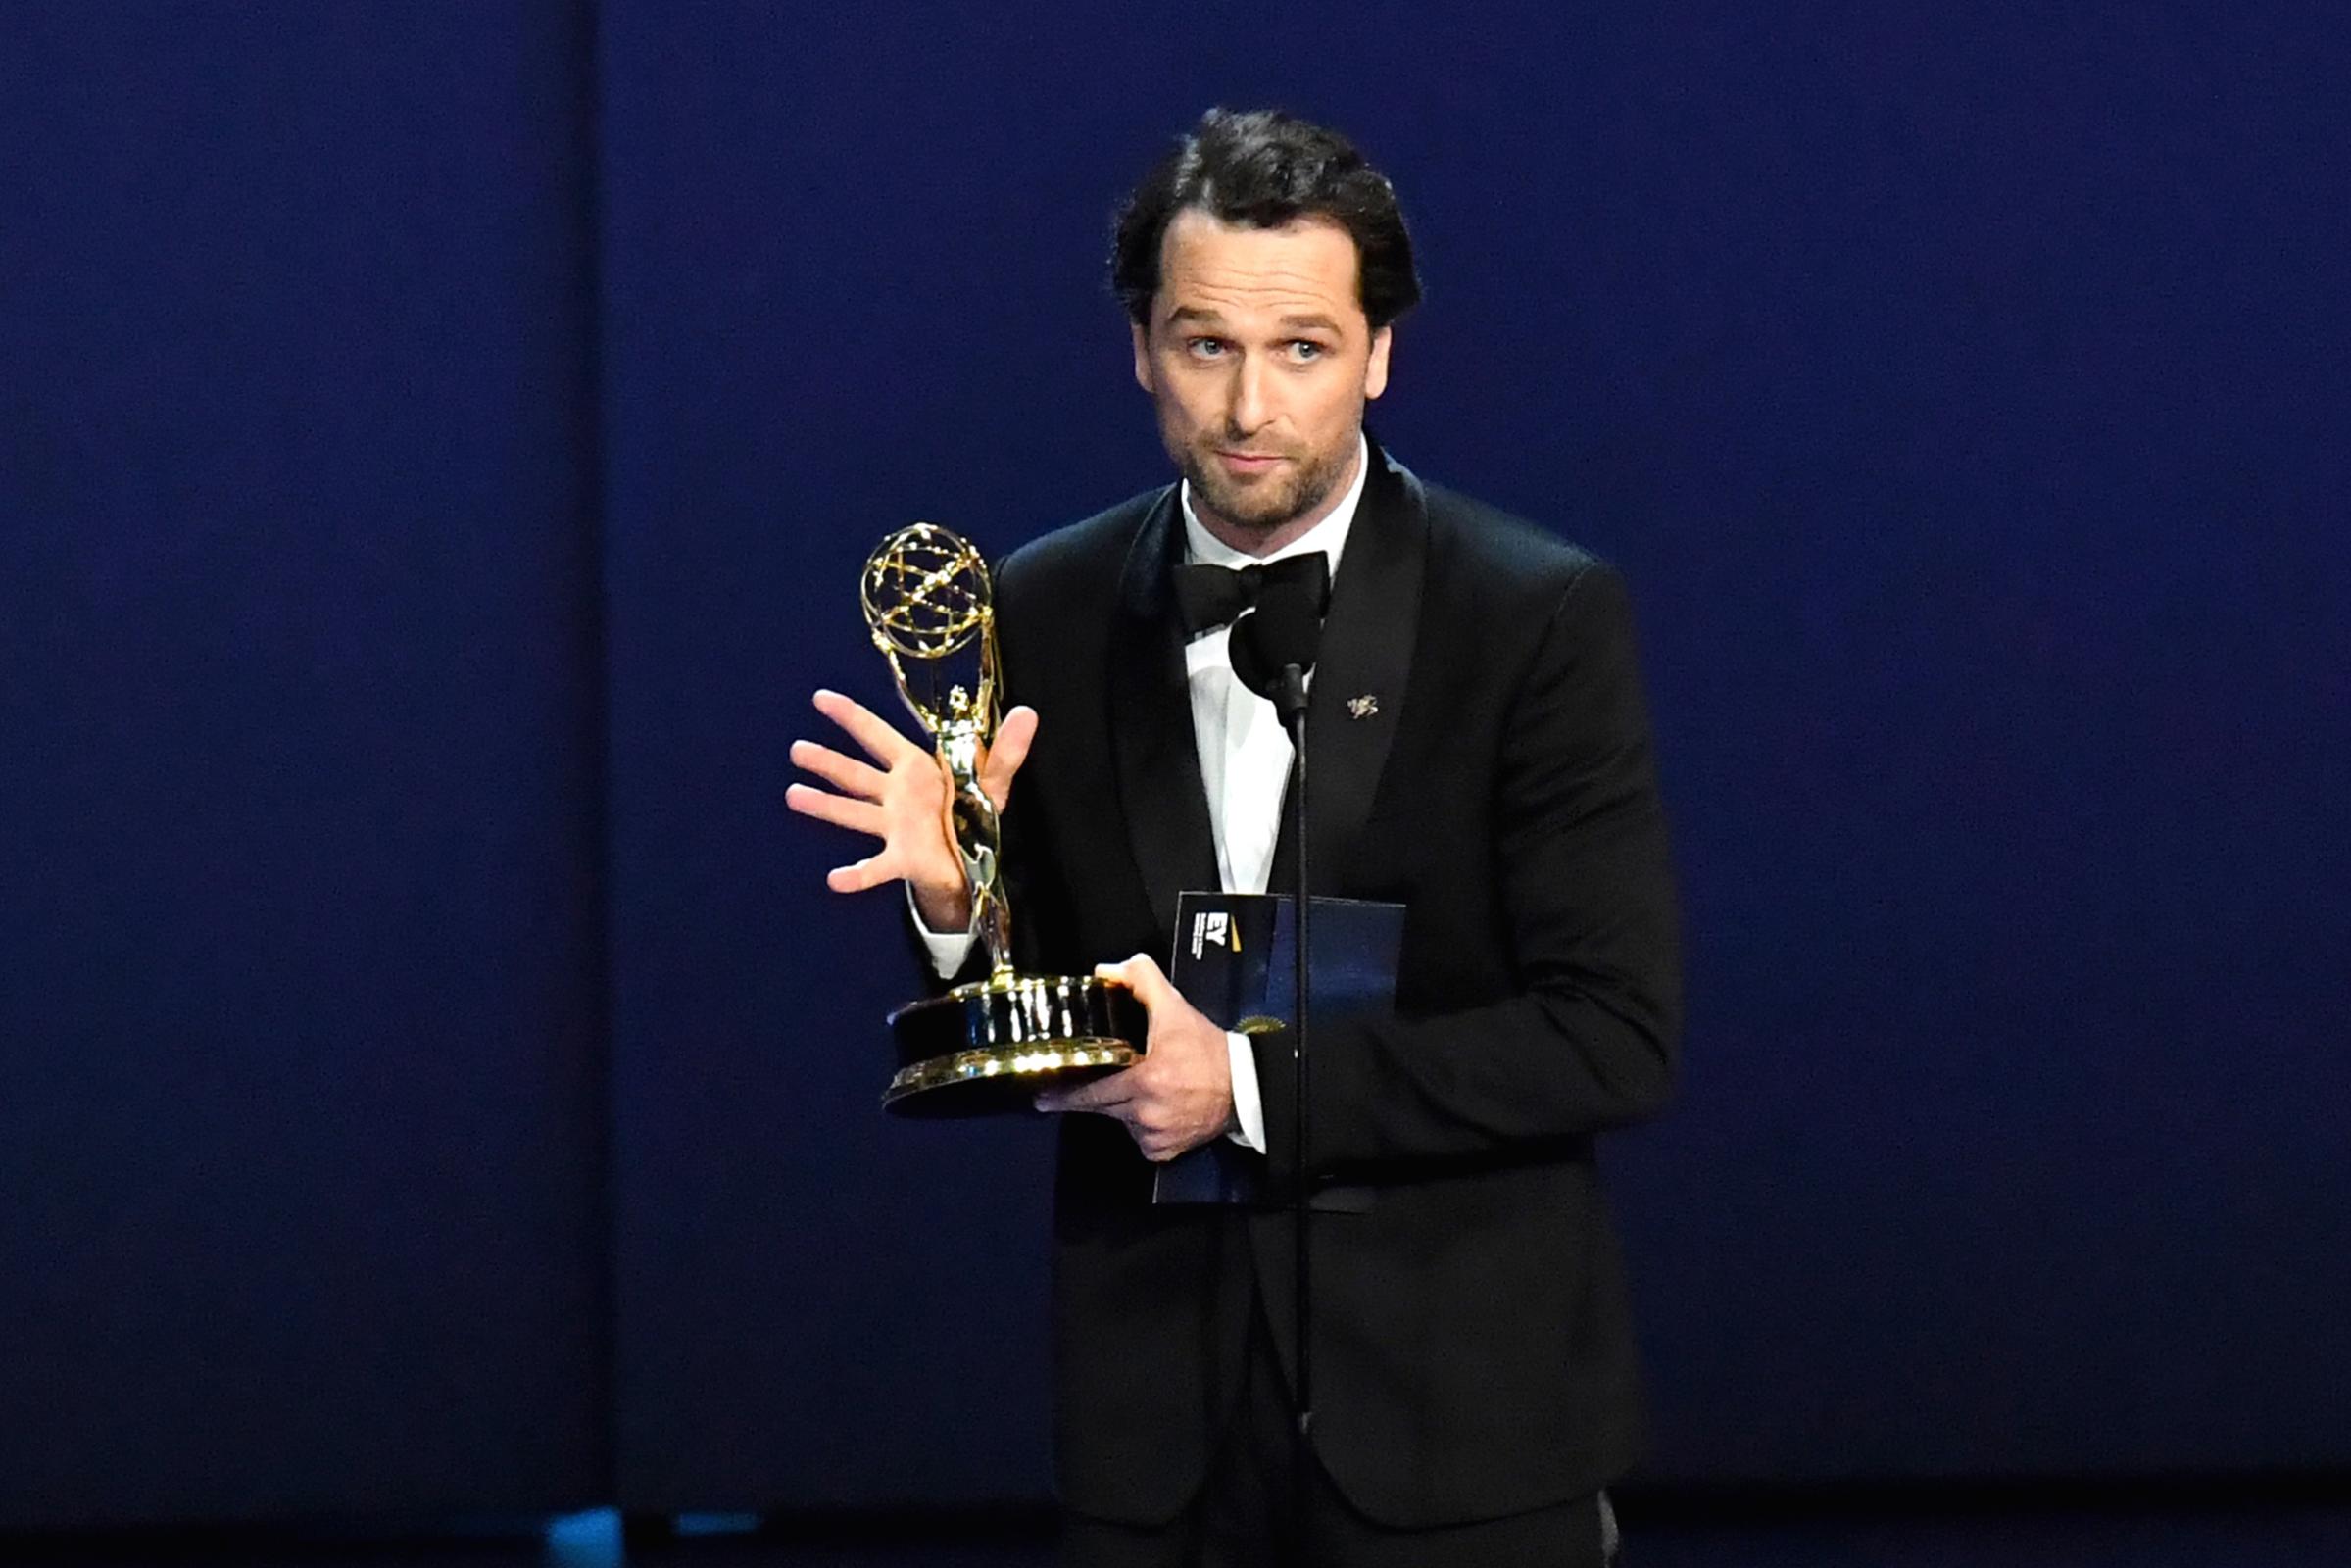 Matthew Rhys accepts the Outstanding Lead Actor in a Drama Series award for 'The Americans' onstage during the 70th Emmy Awards at Microsoft Theater on Sept. 17, 2018 in Los Angeles.